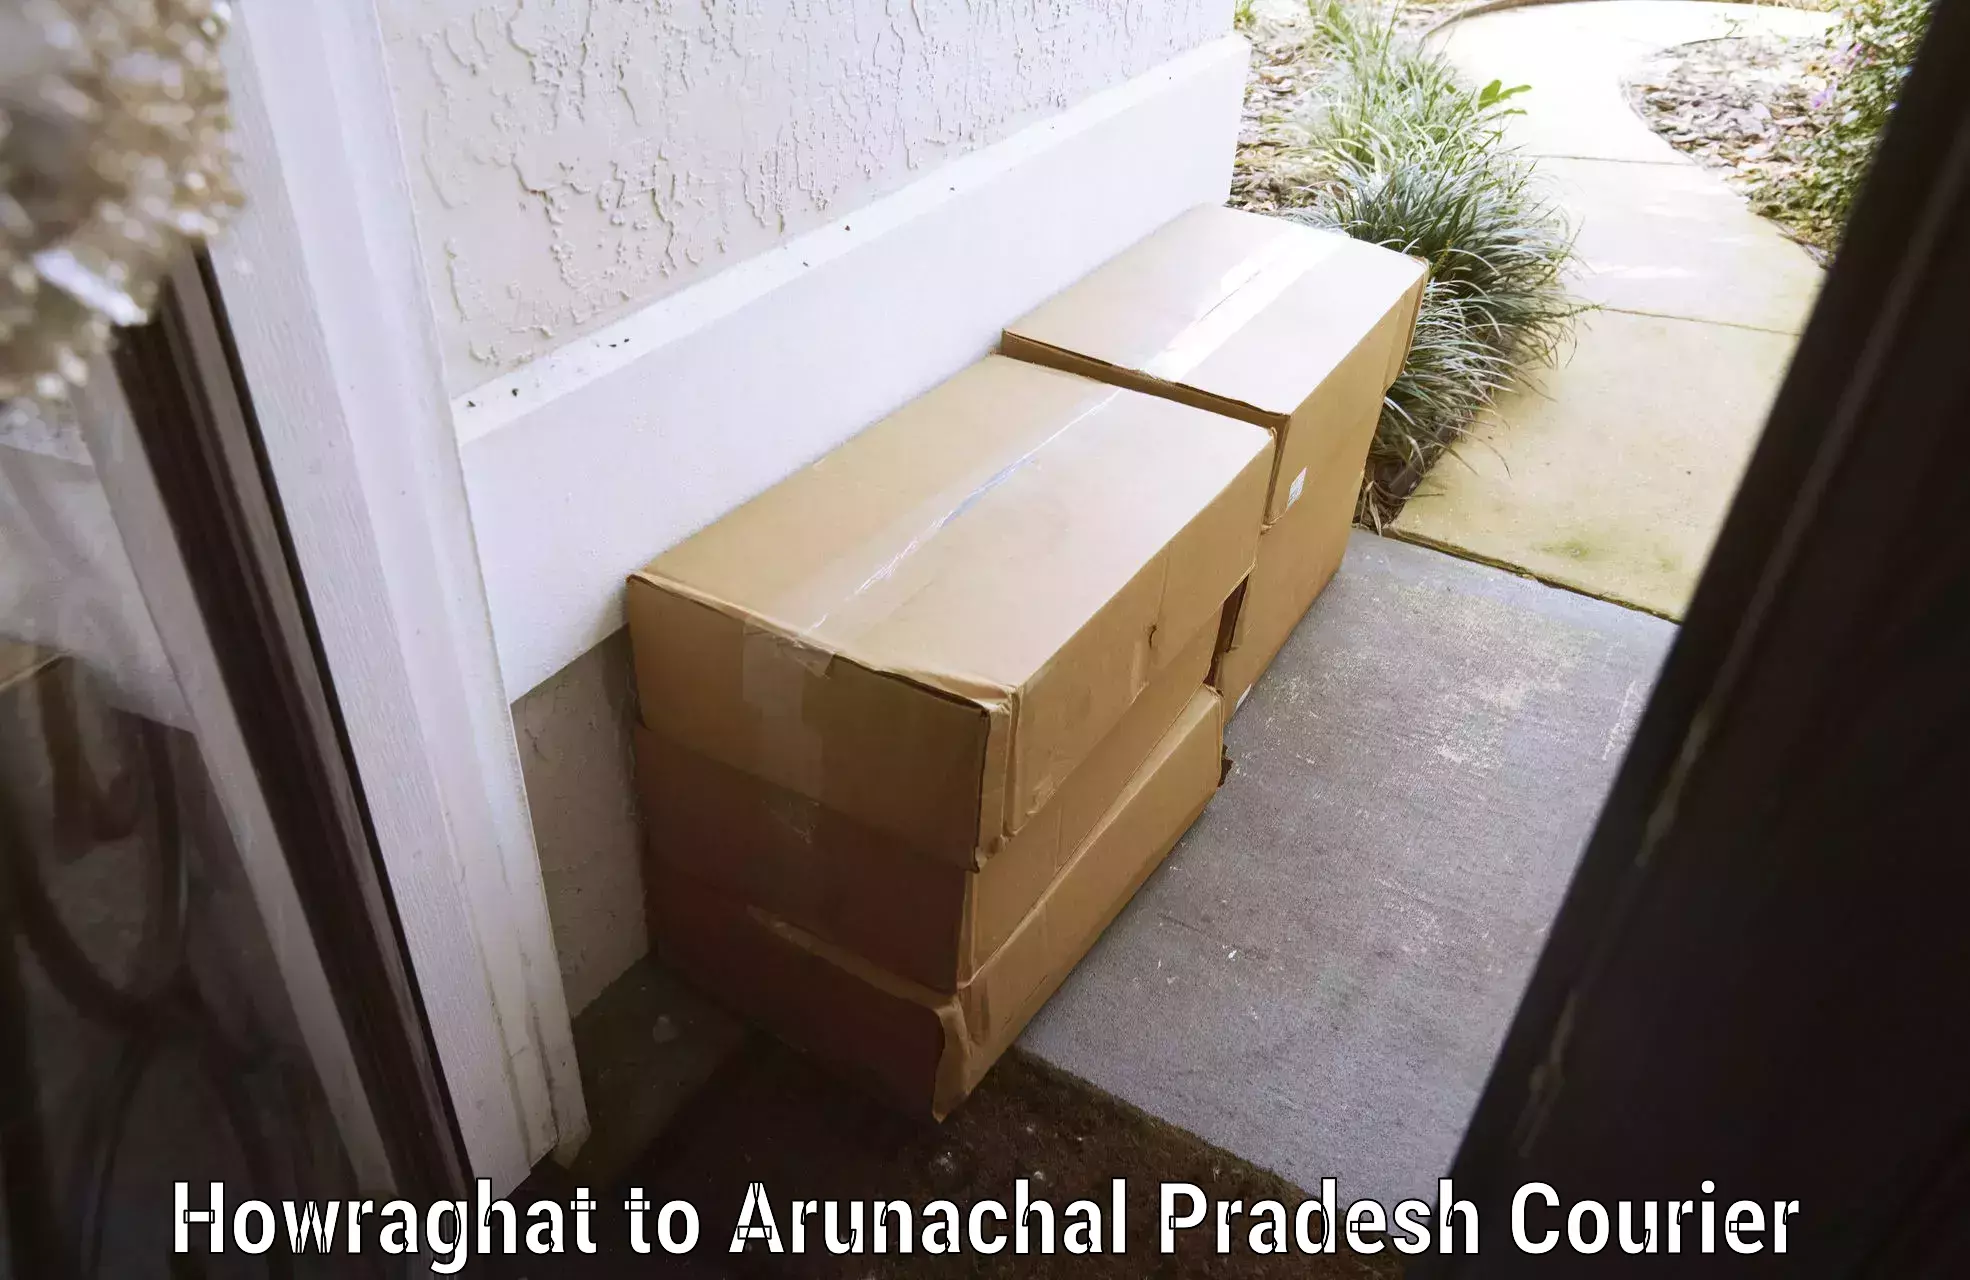 Personal effects shipping in Howraghat to Arunachal Pradesh